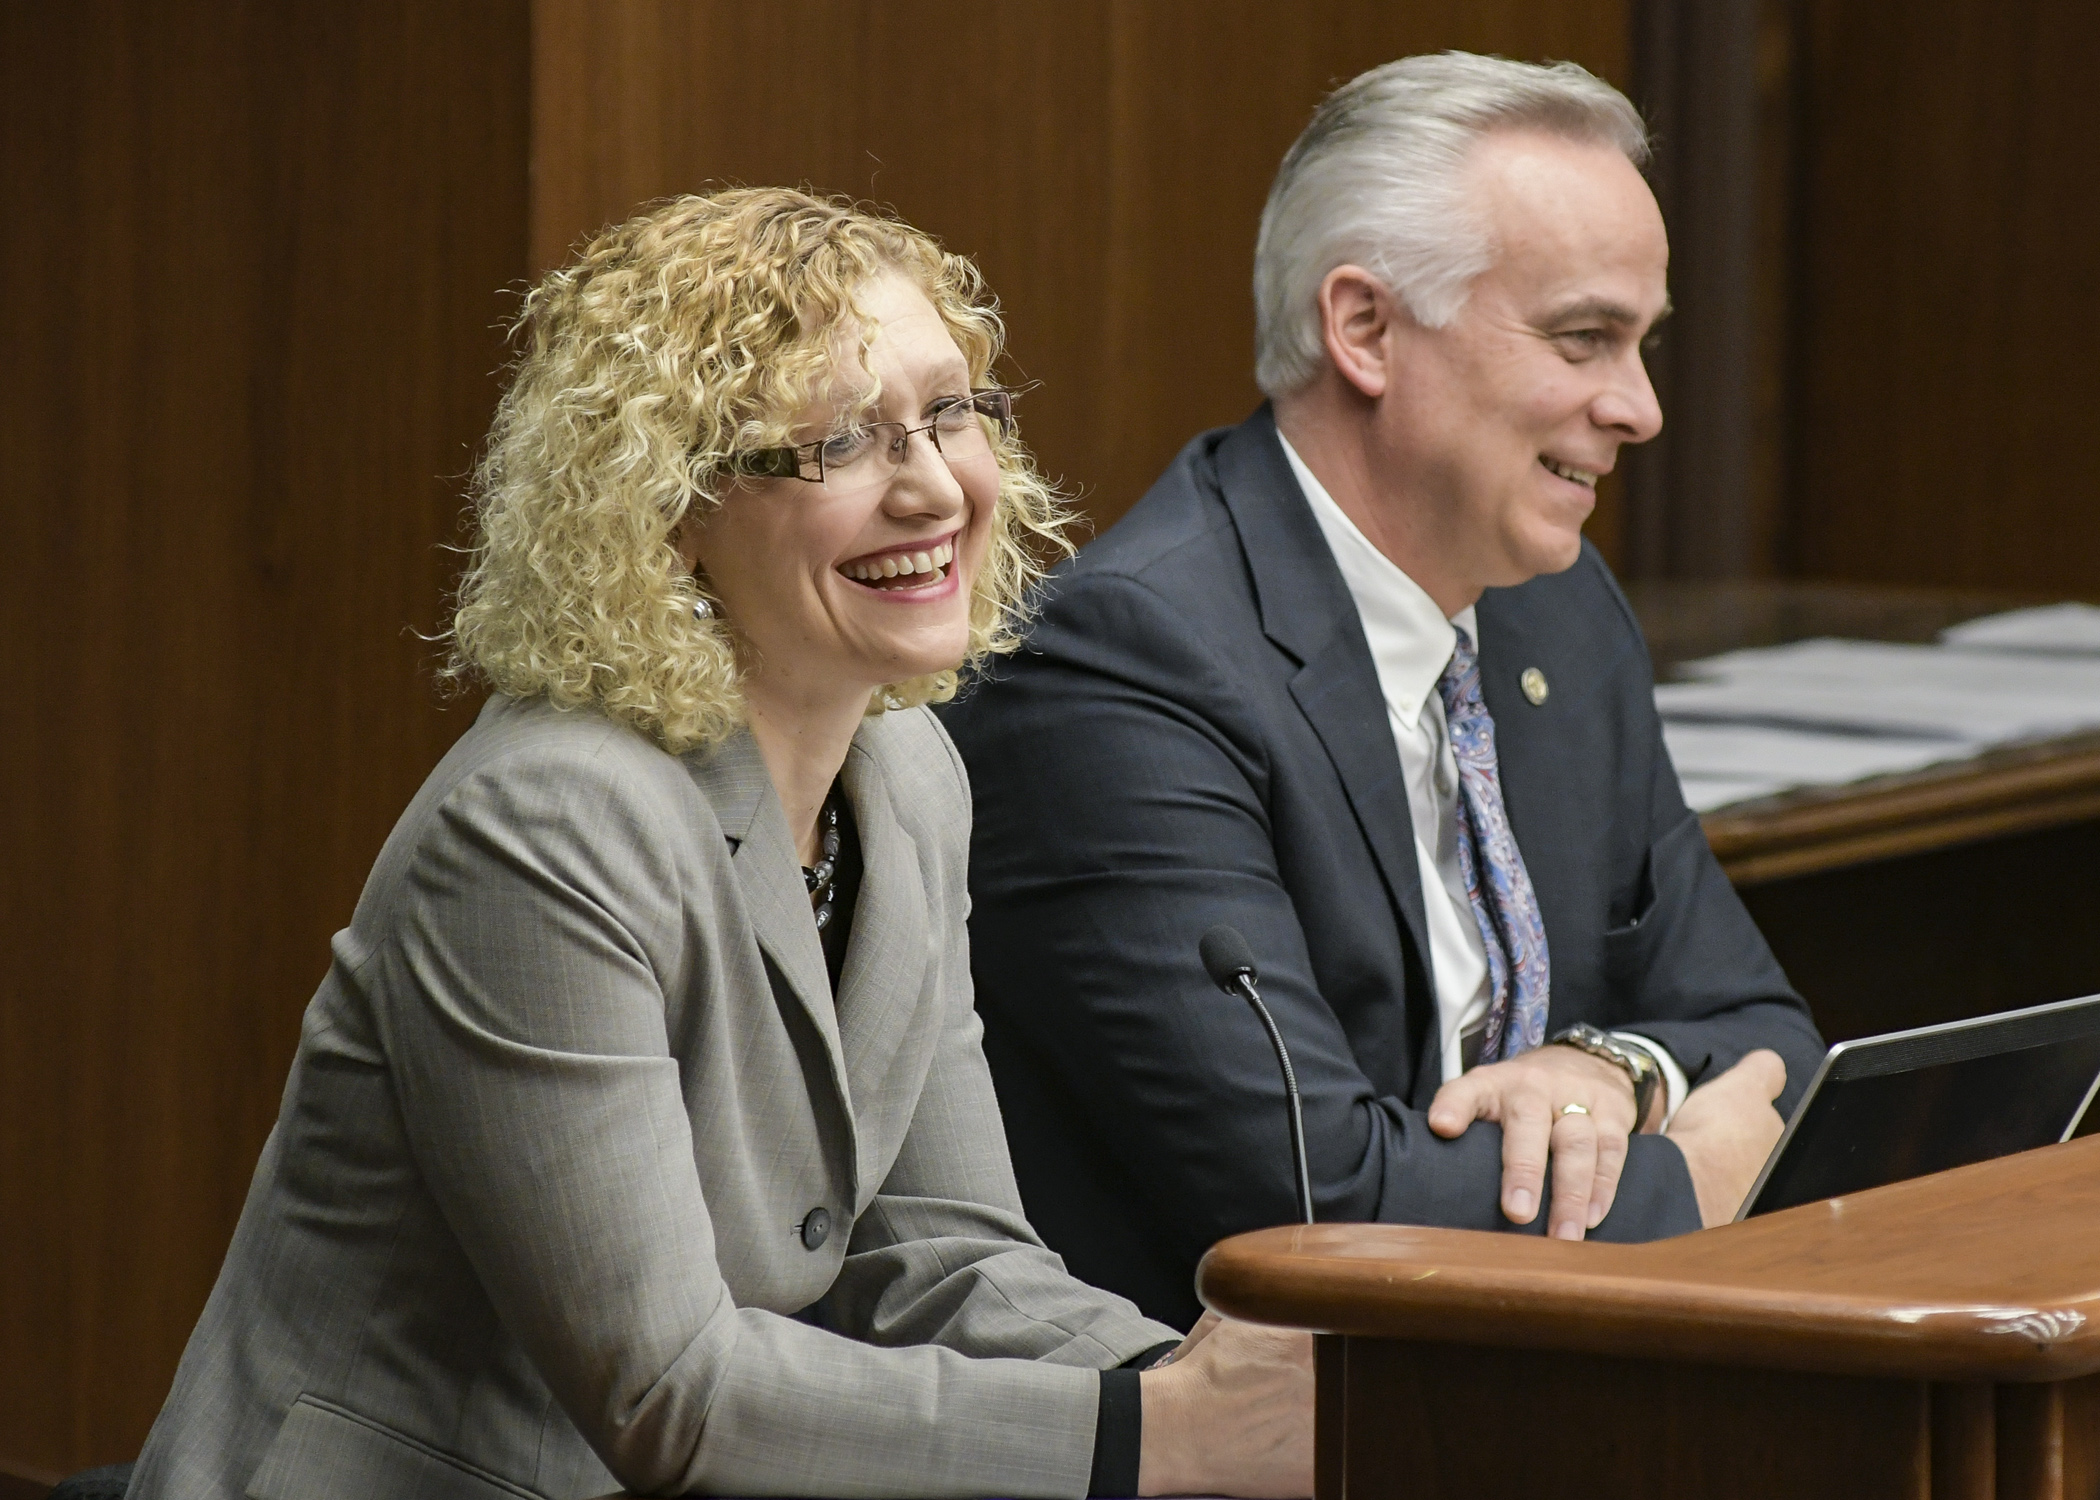 Melissa Lallak, administrator of the Hennepin County Medical Examiner’s Office, testifies before the House Health and Human Services Finance Committee March 22 in support of a bill sponsored by Rep. Tony Albright, right. Photo by Andrew VonBank